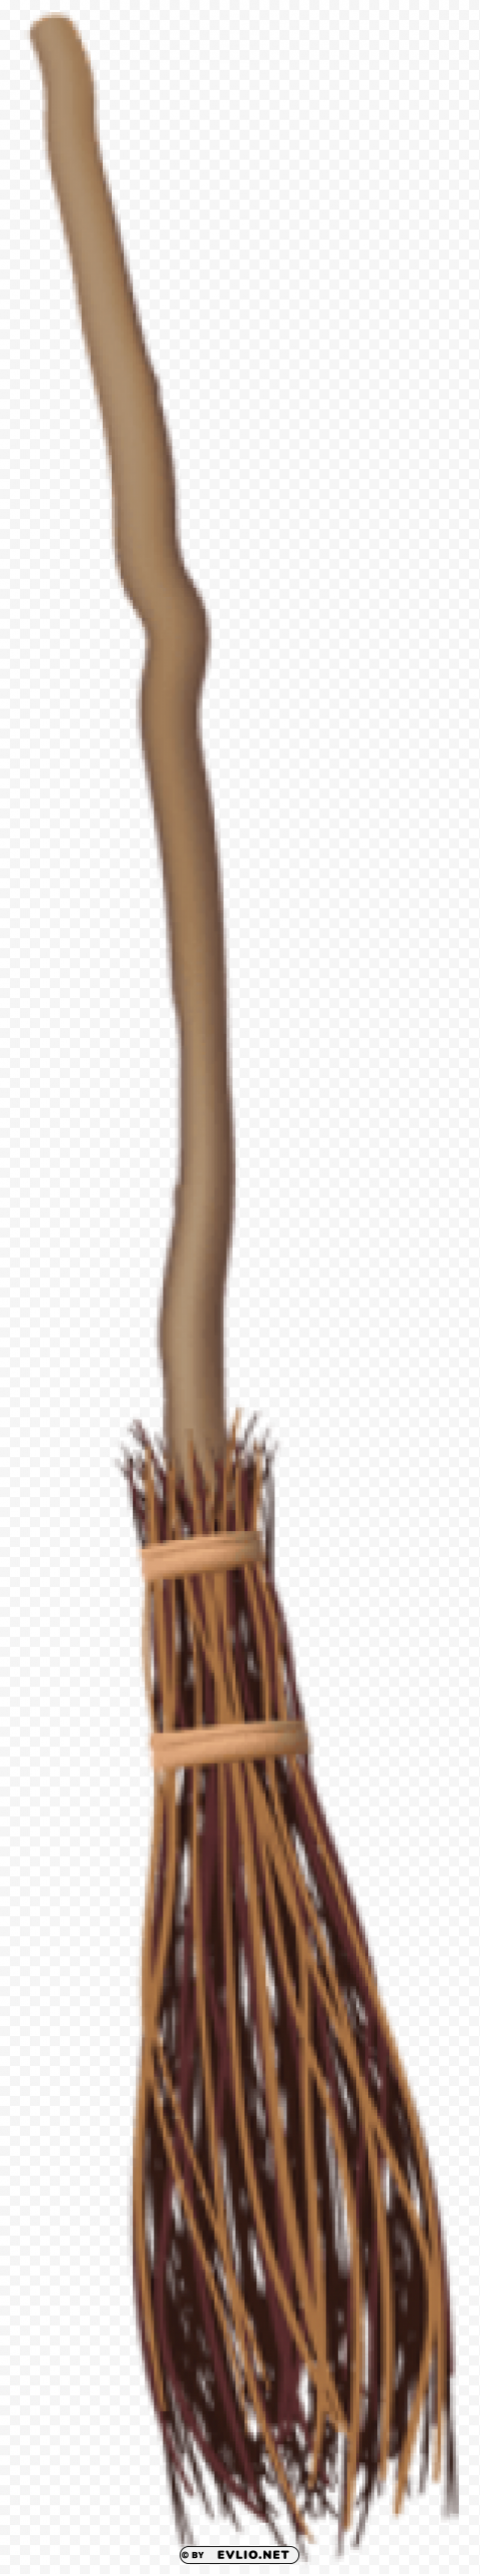 witch broom Transparent PNG Image Isolation